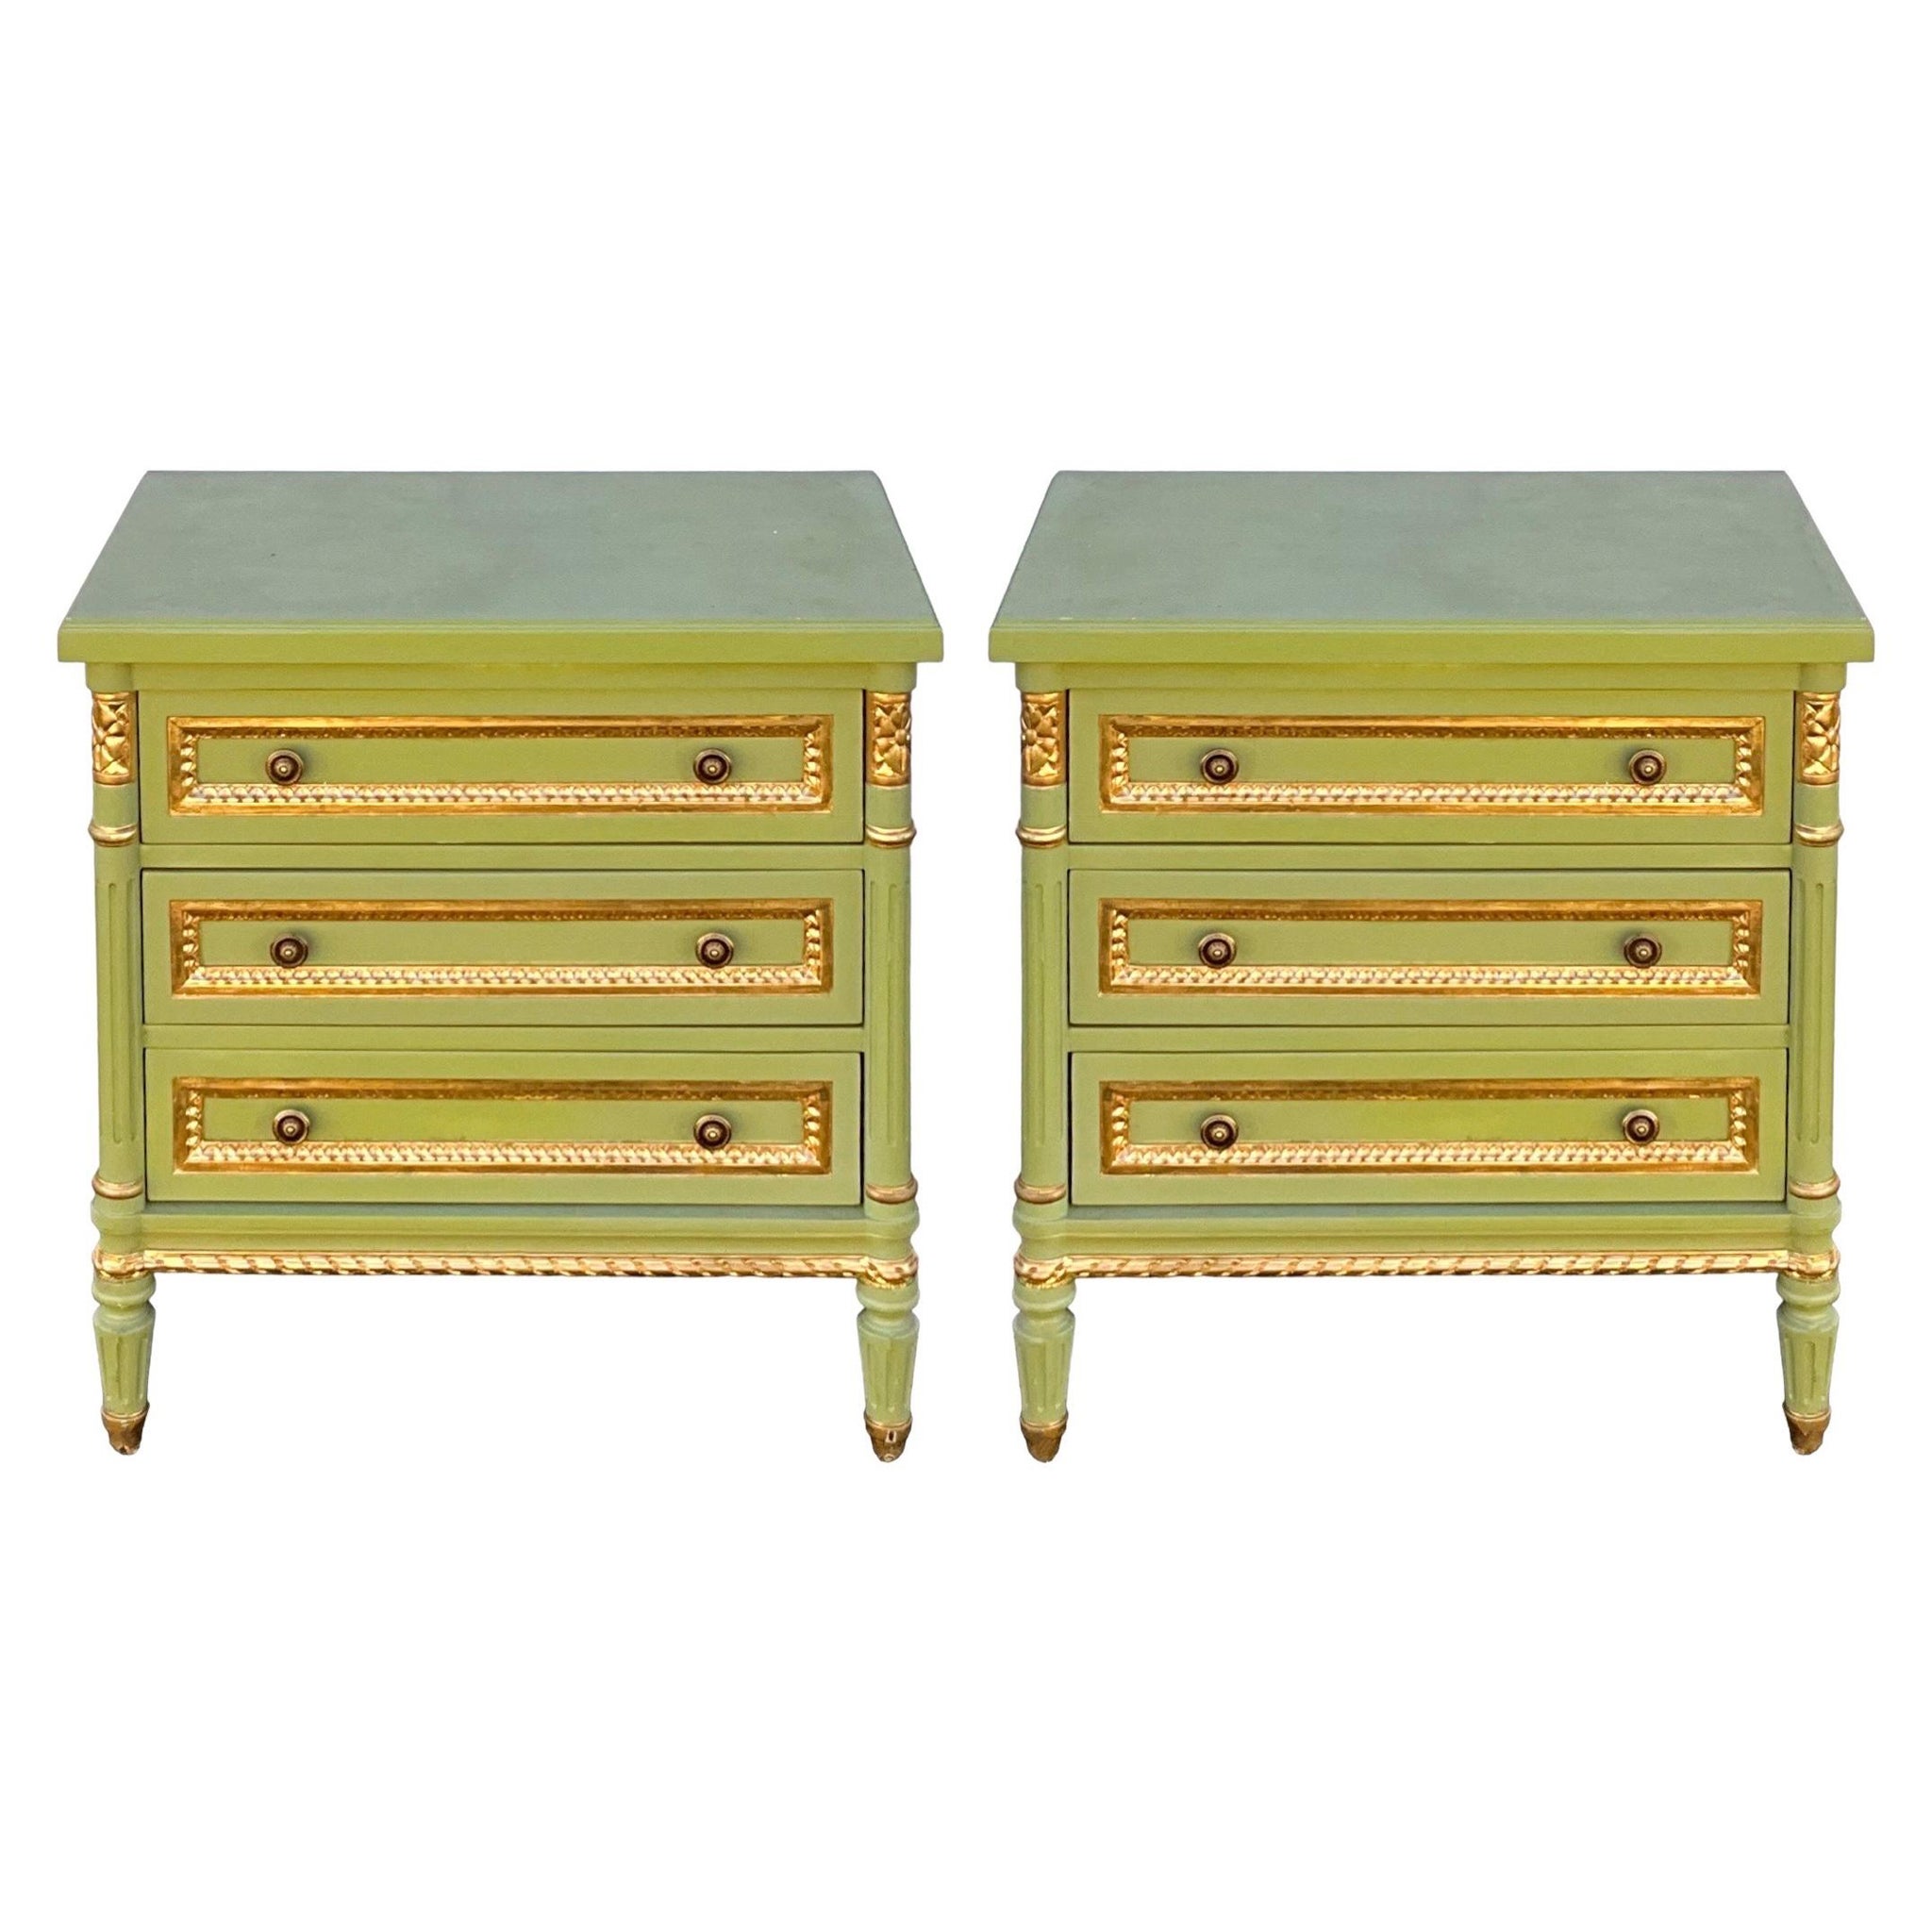 French Louis XVI Style Painted Chests / Commodes / Tables Att. To Julia Gray